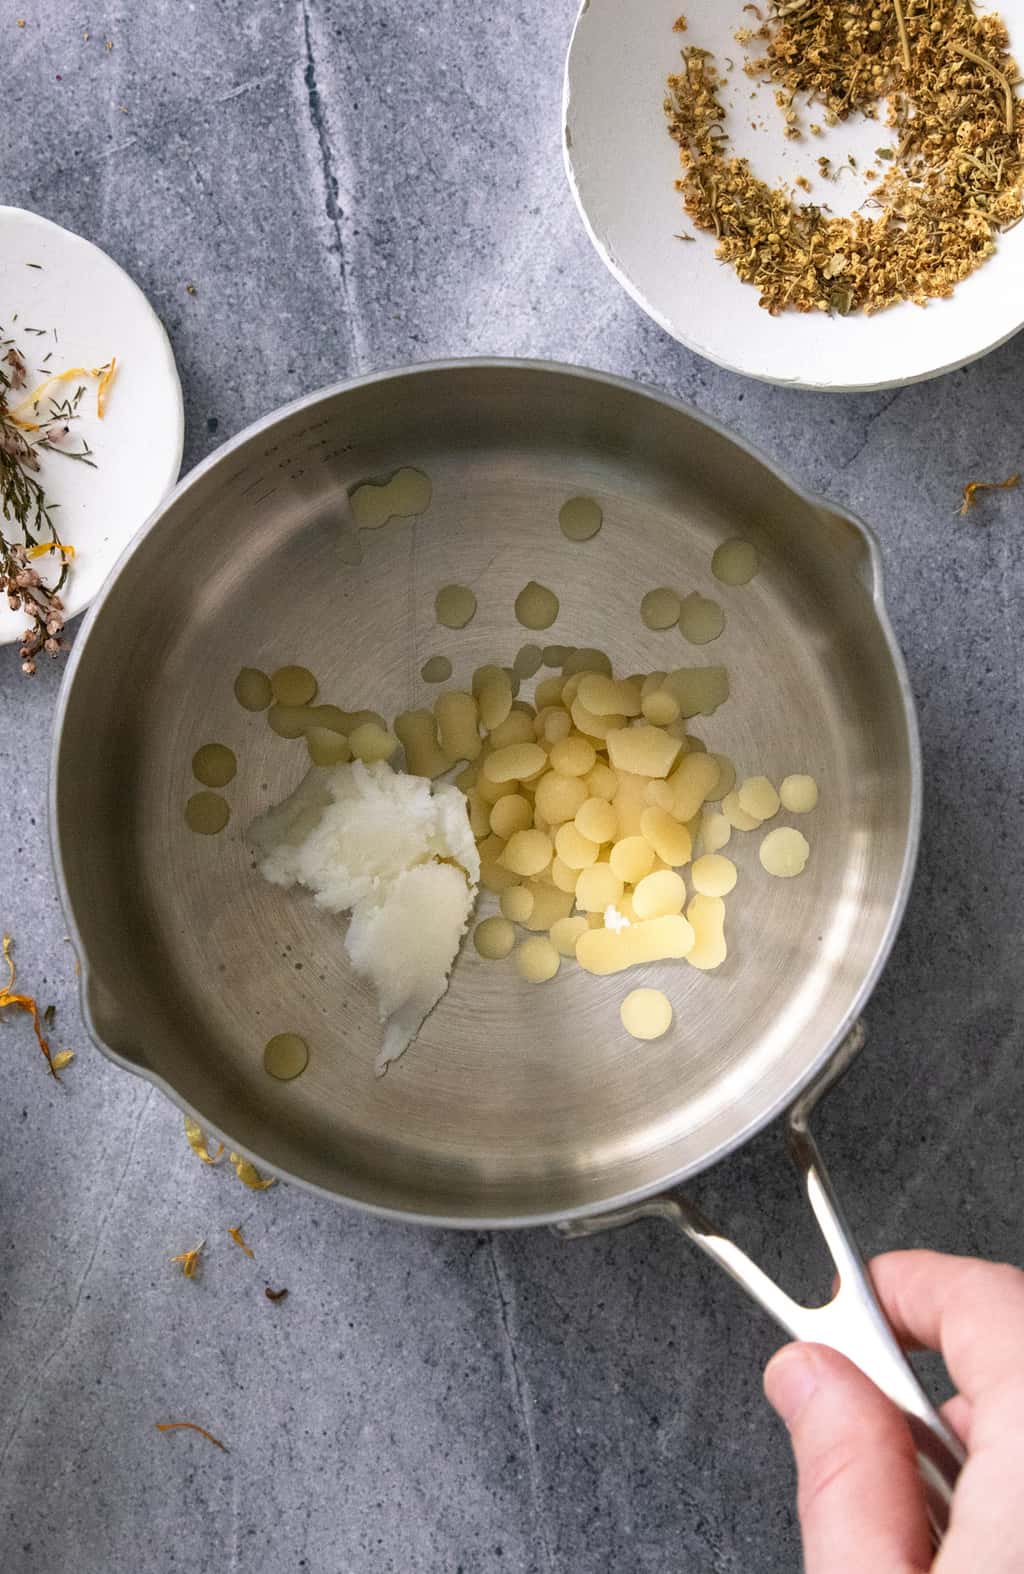 Melting wax and butter for herbal salves